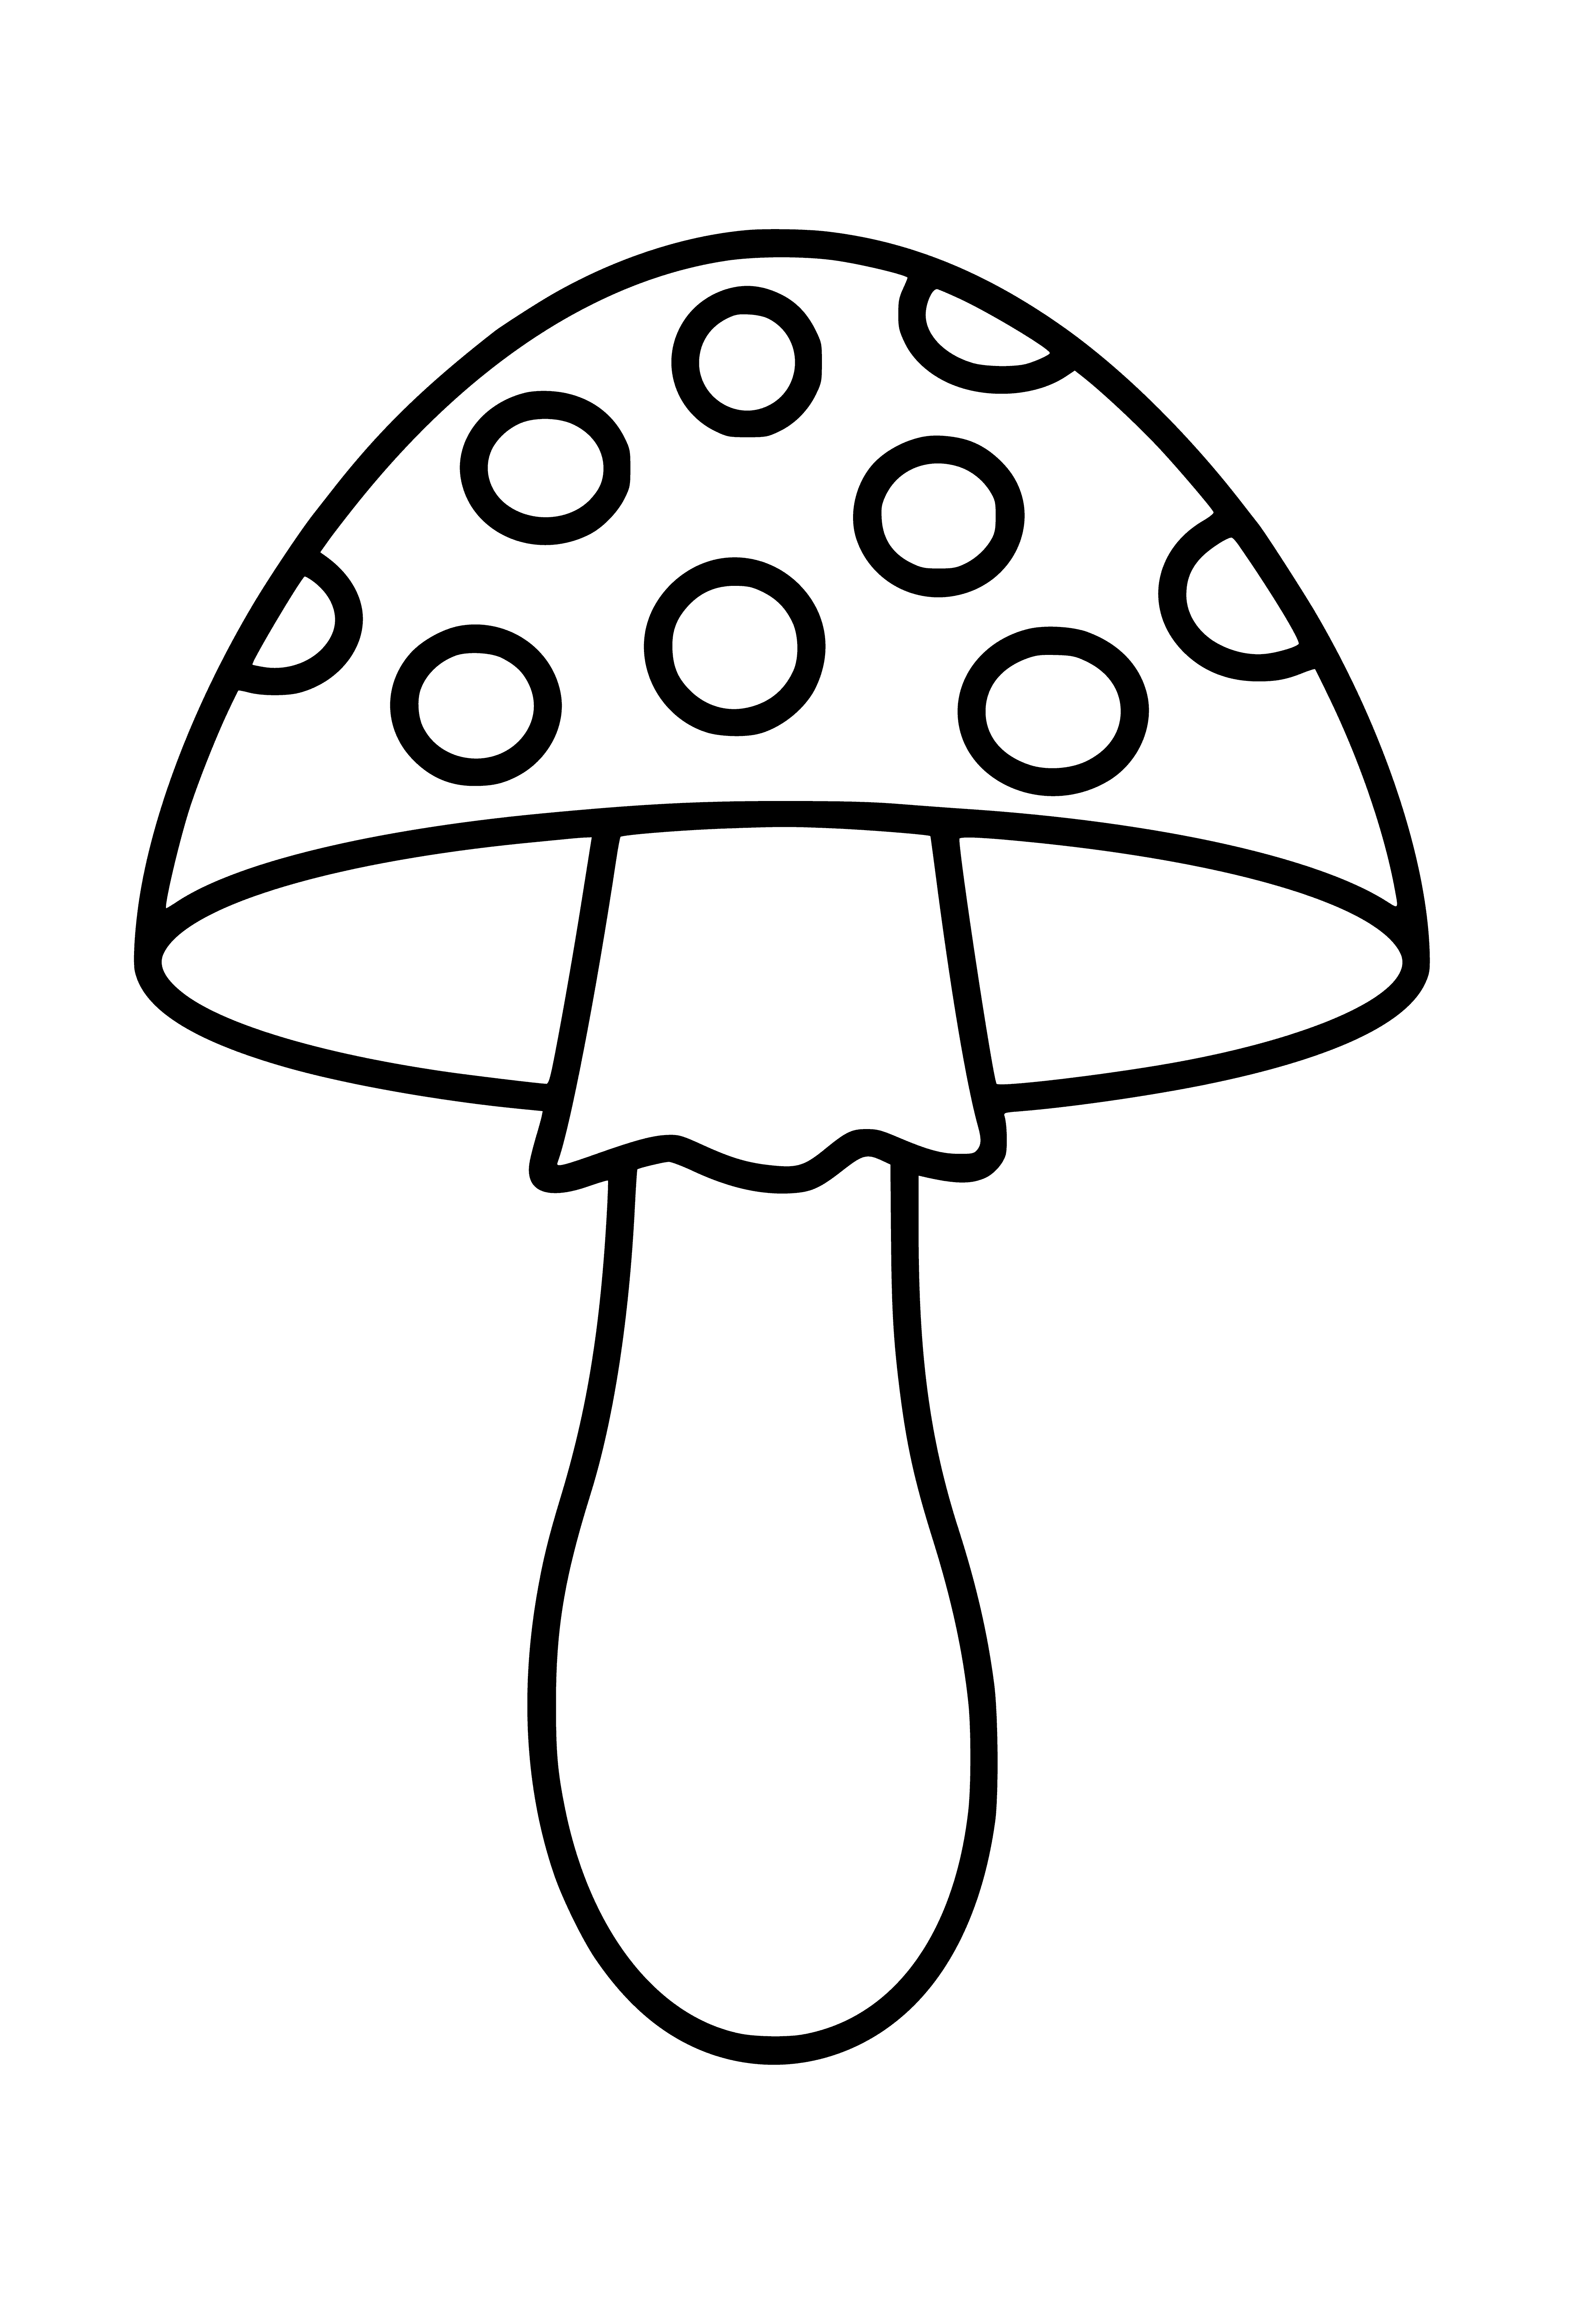 coloring page: A large Amanita mushroom surrounded by green leaves and flowers in a page's center. #mushrooms #green #flowers